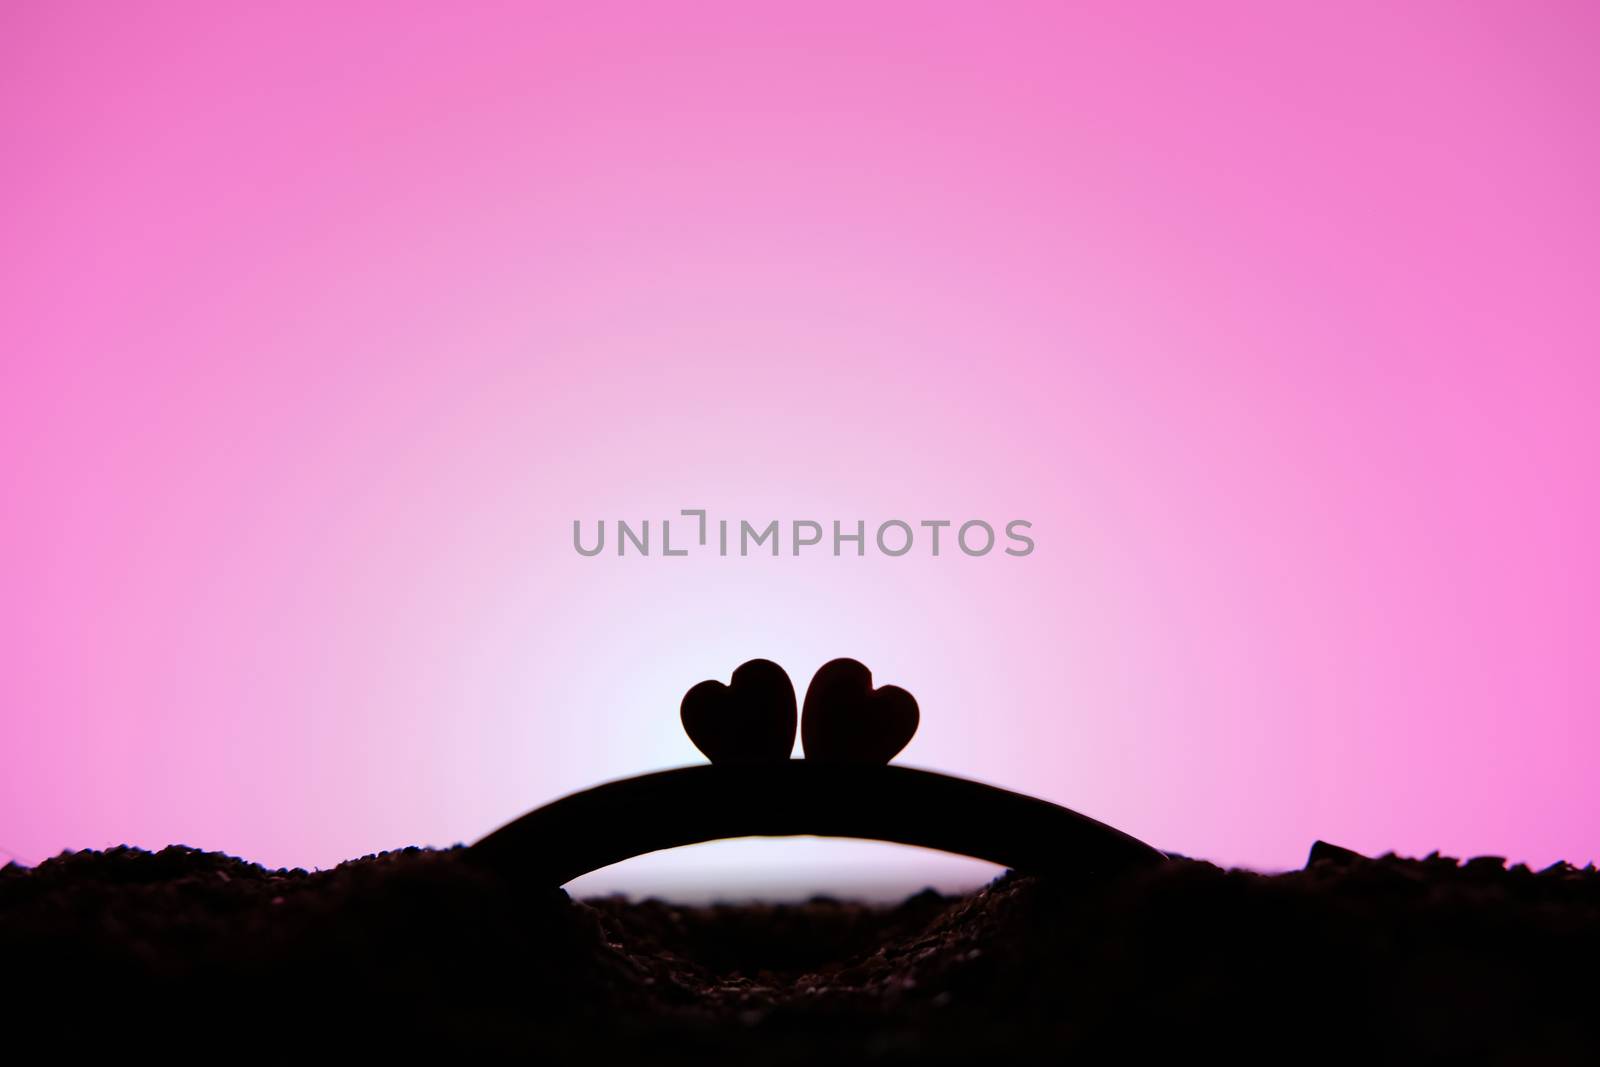 miniature people / toy photography - conceptual valentine holiday illustration. two heart silhouette above the bridge